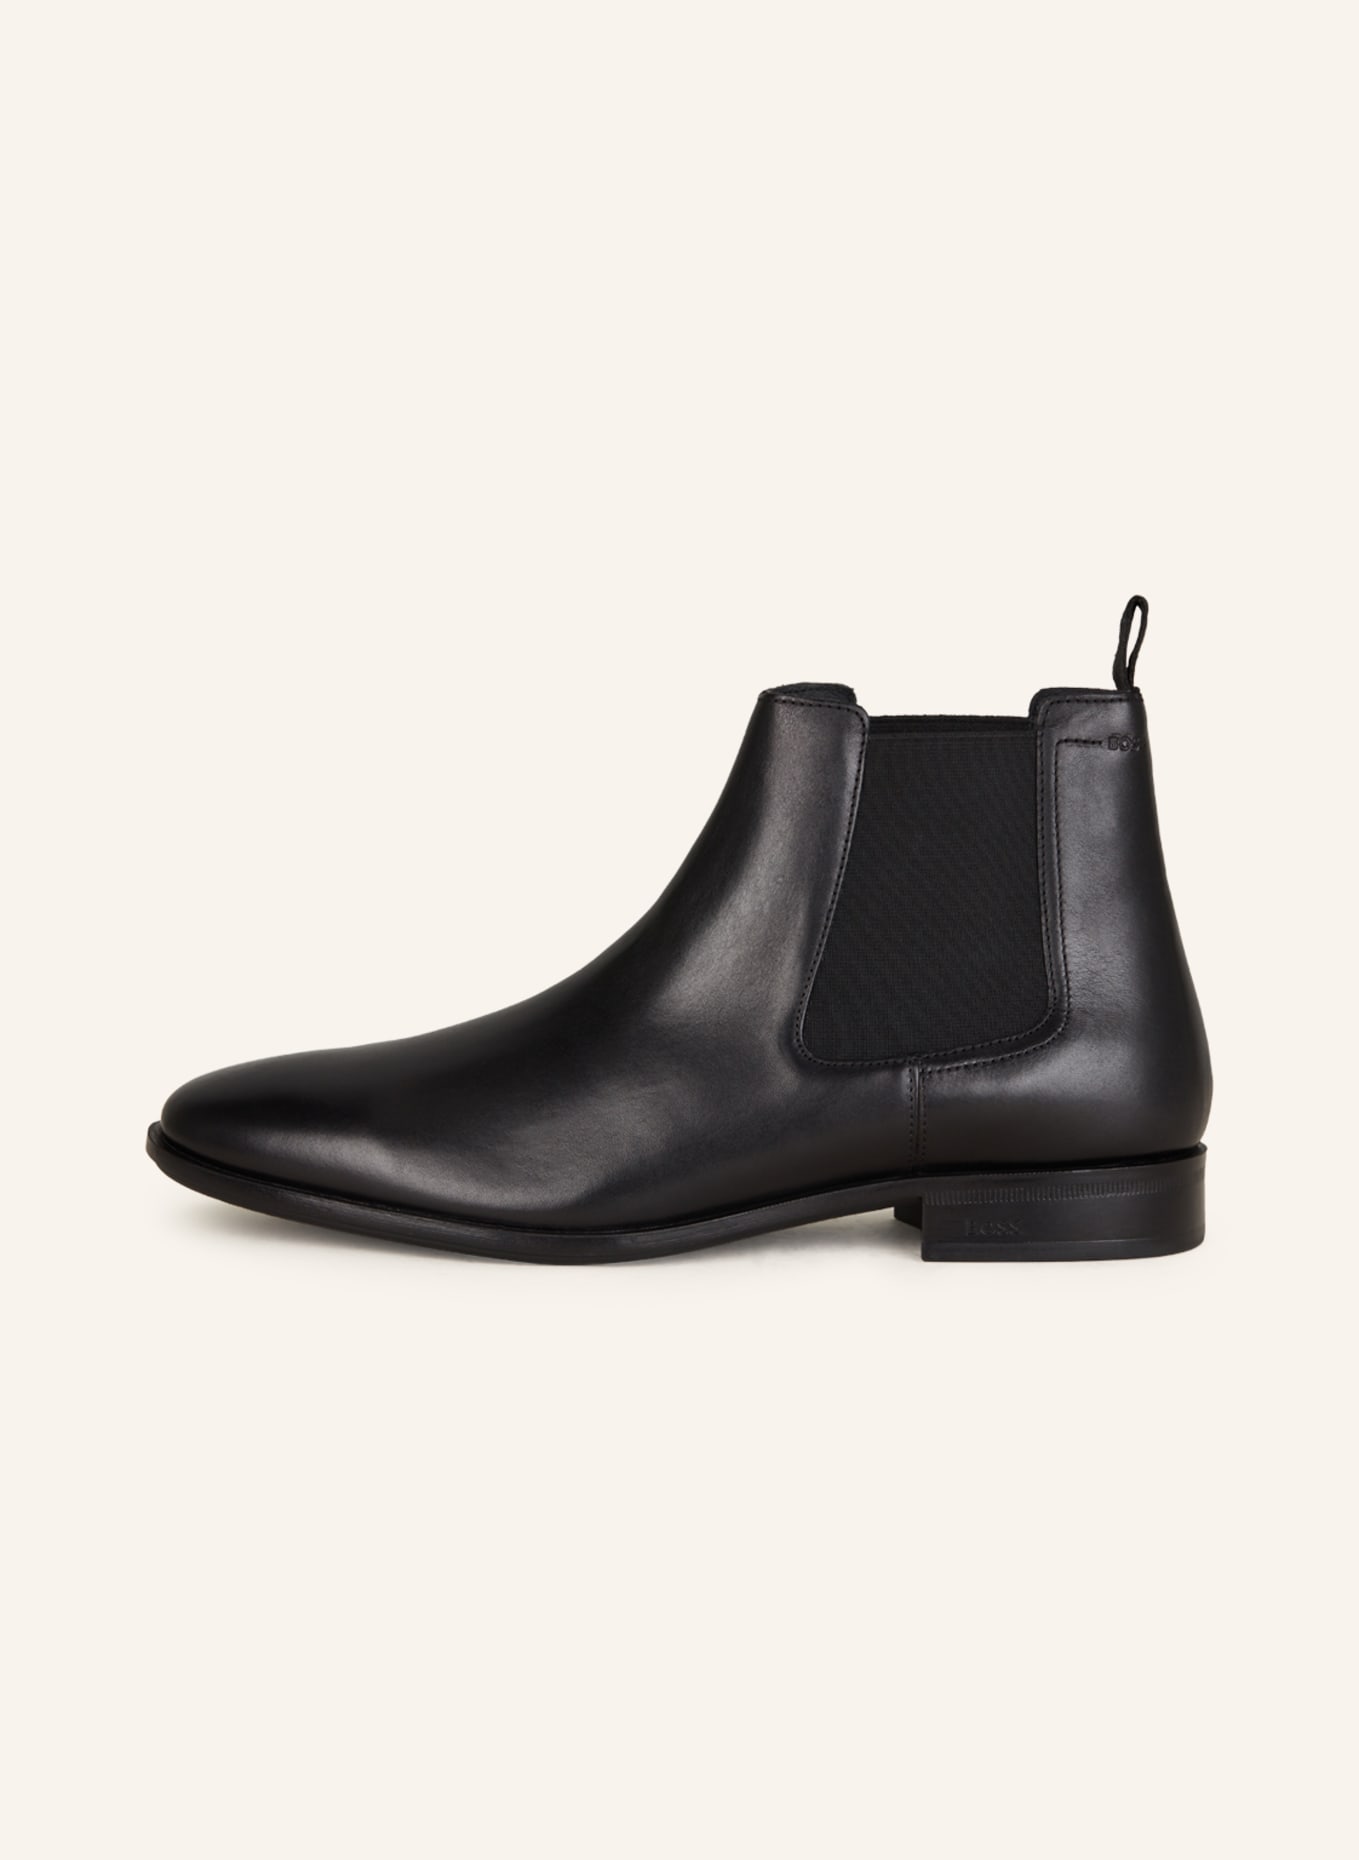 BOSS Chelsea-Boots COLBY CHEB, Farbe: SCHWARZ (Bild 4)